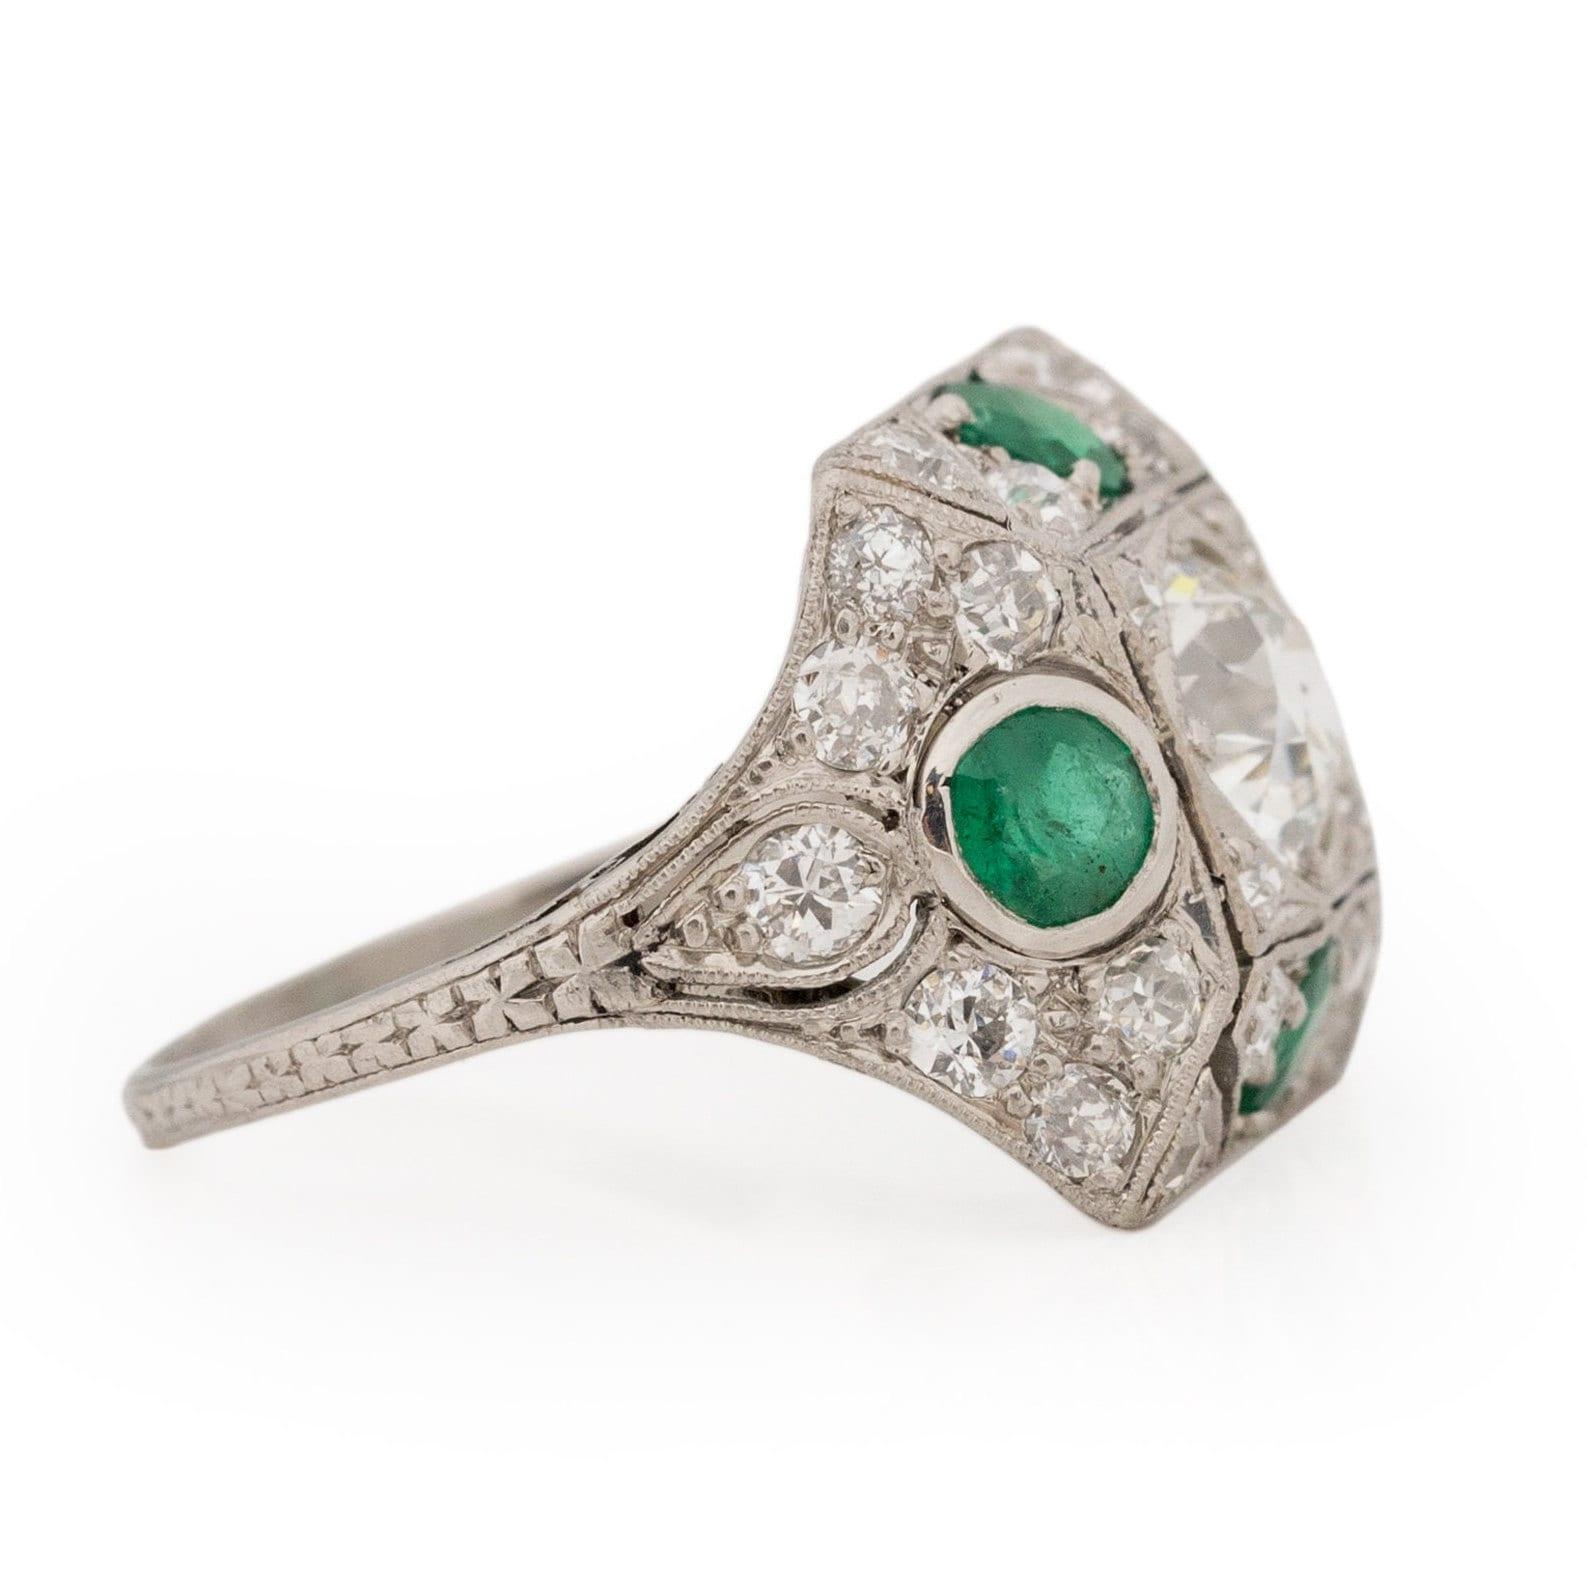 Circa 1901 Edwardian Platinum Old Mine Cut Center with Natural Emerald Accents In Good Condition For Sale In Addison, TX